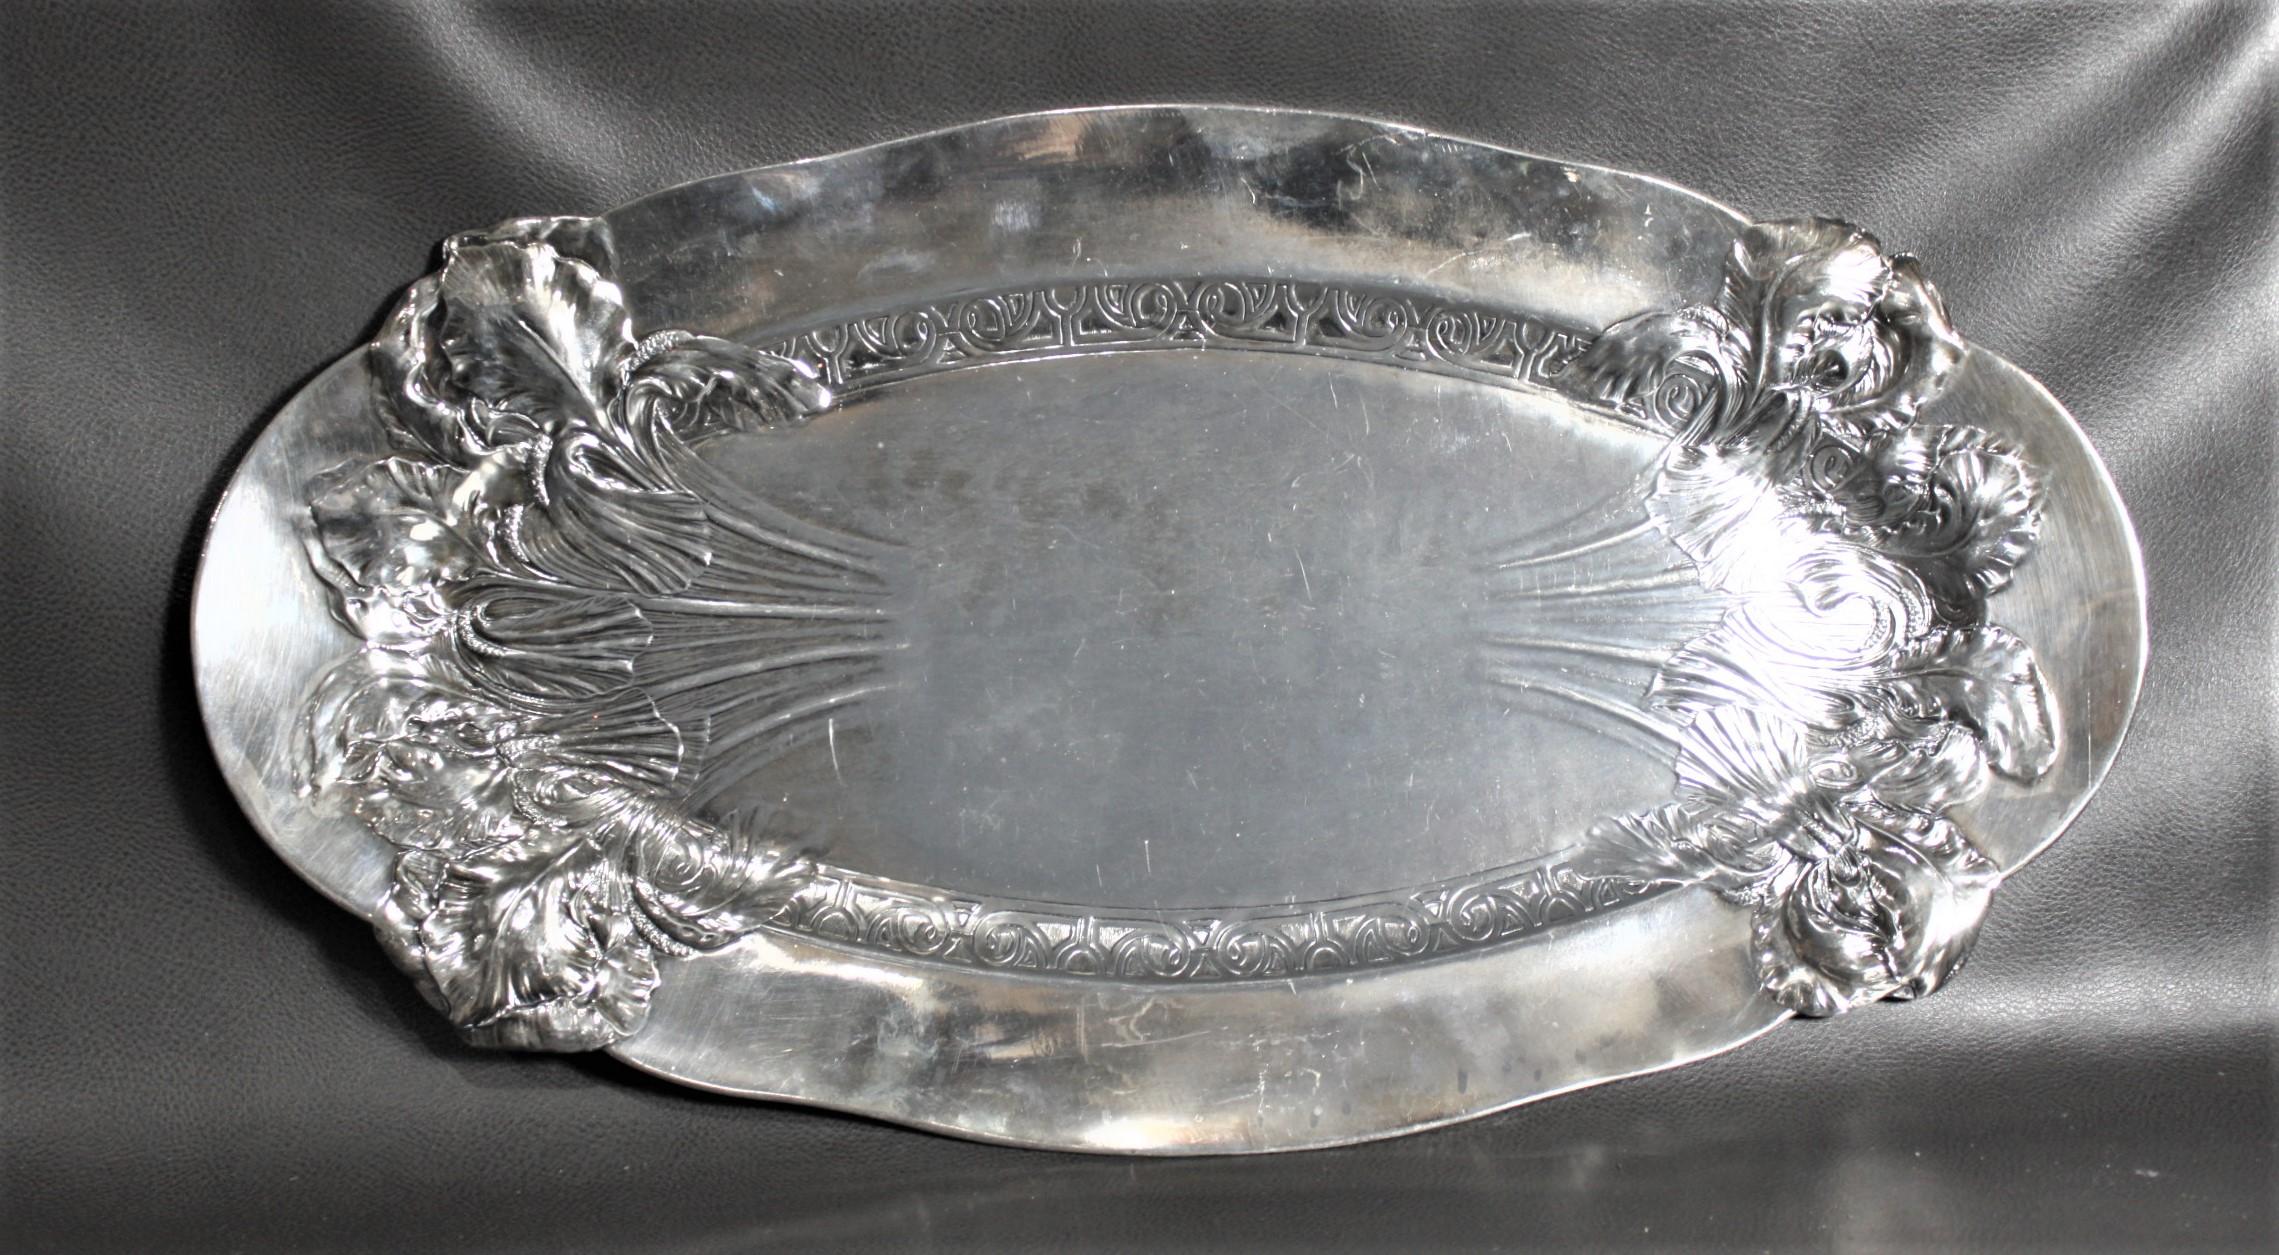 This antique silver plated oval serving tray is completely unsigned, but believed to have been made in England in circa 1920 in the Art Nouveau style. The tray has an elongated oval shape with a high wide rim and raised stylized floral decoration